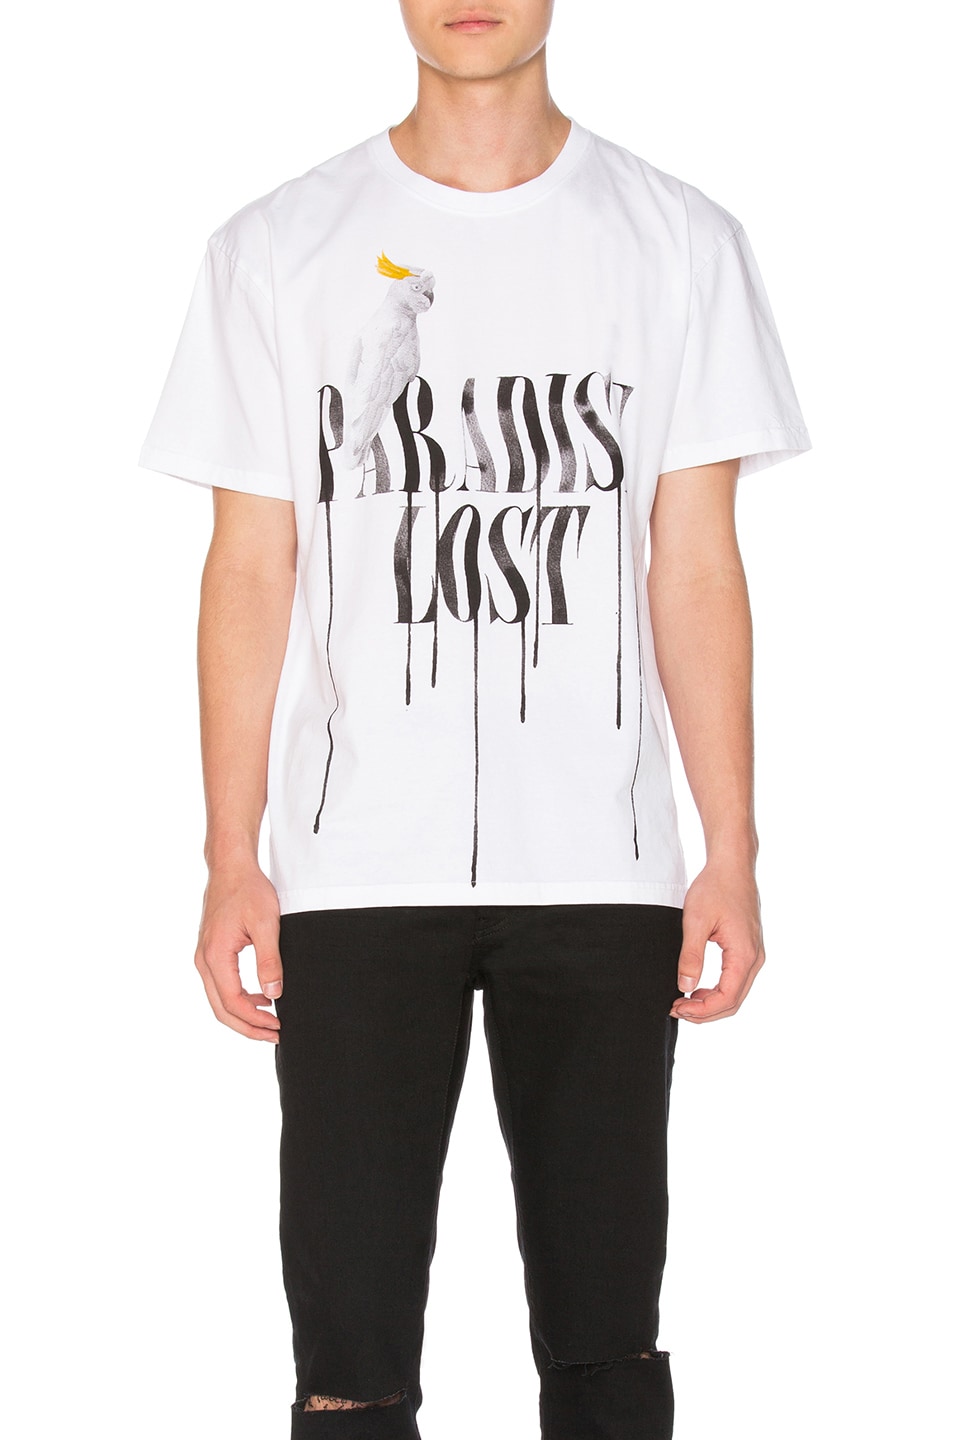 Image 1 of Alchemist Paradise Lost Tee in White